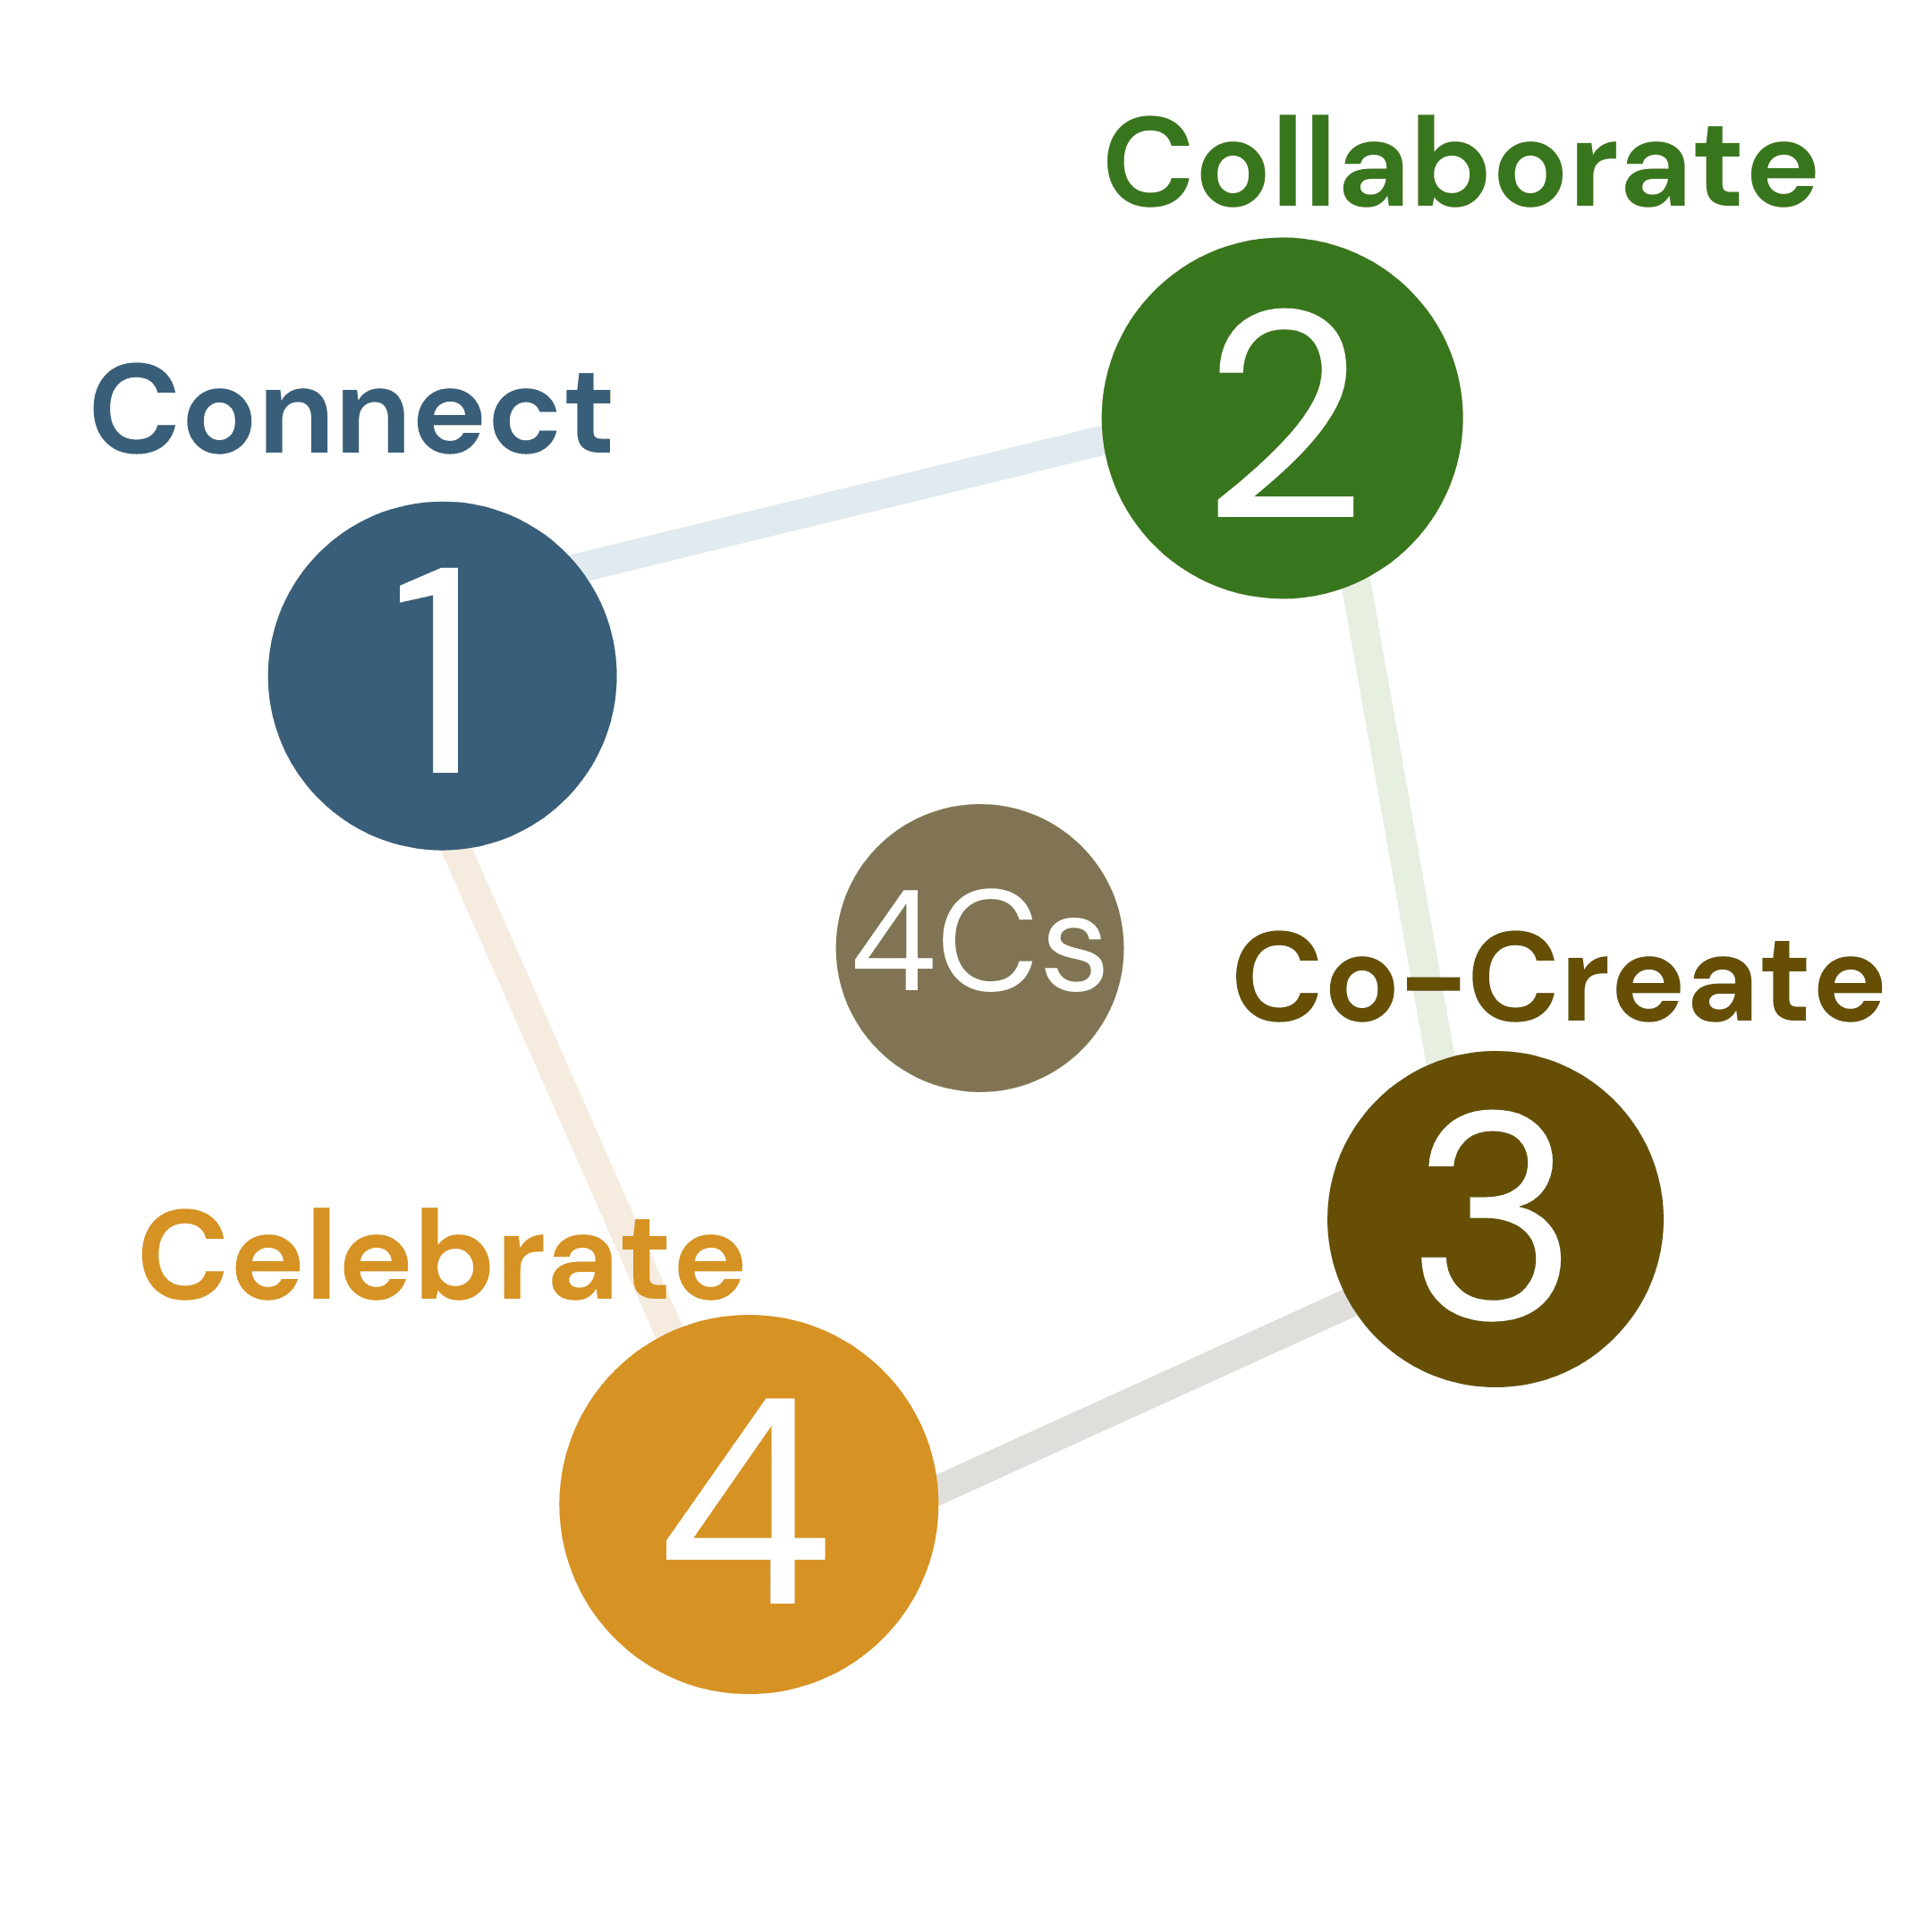 The four steps of WiseTribe's 4Cs community learning process